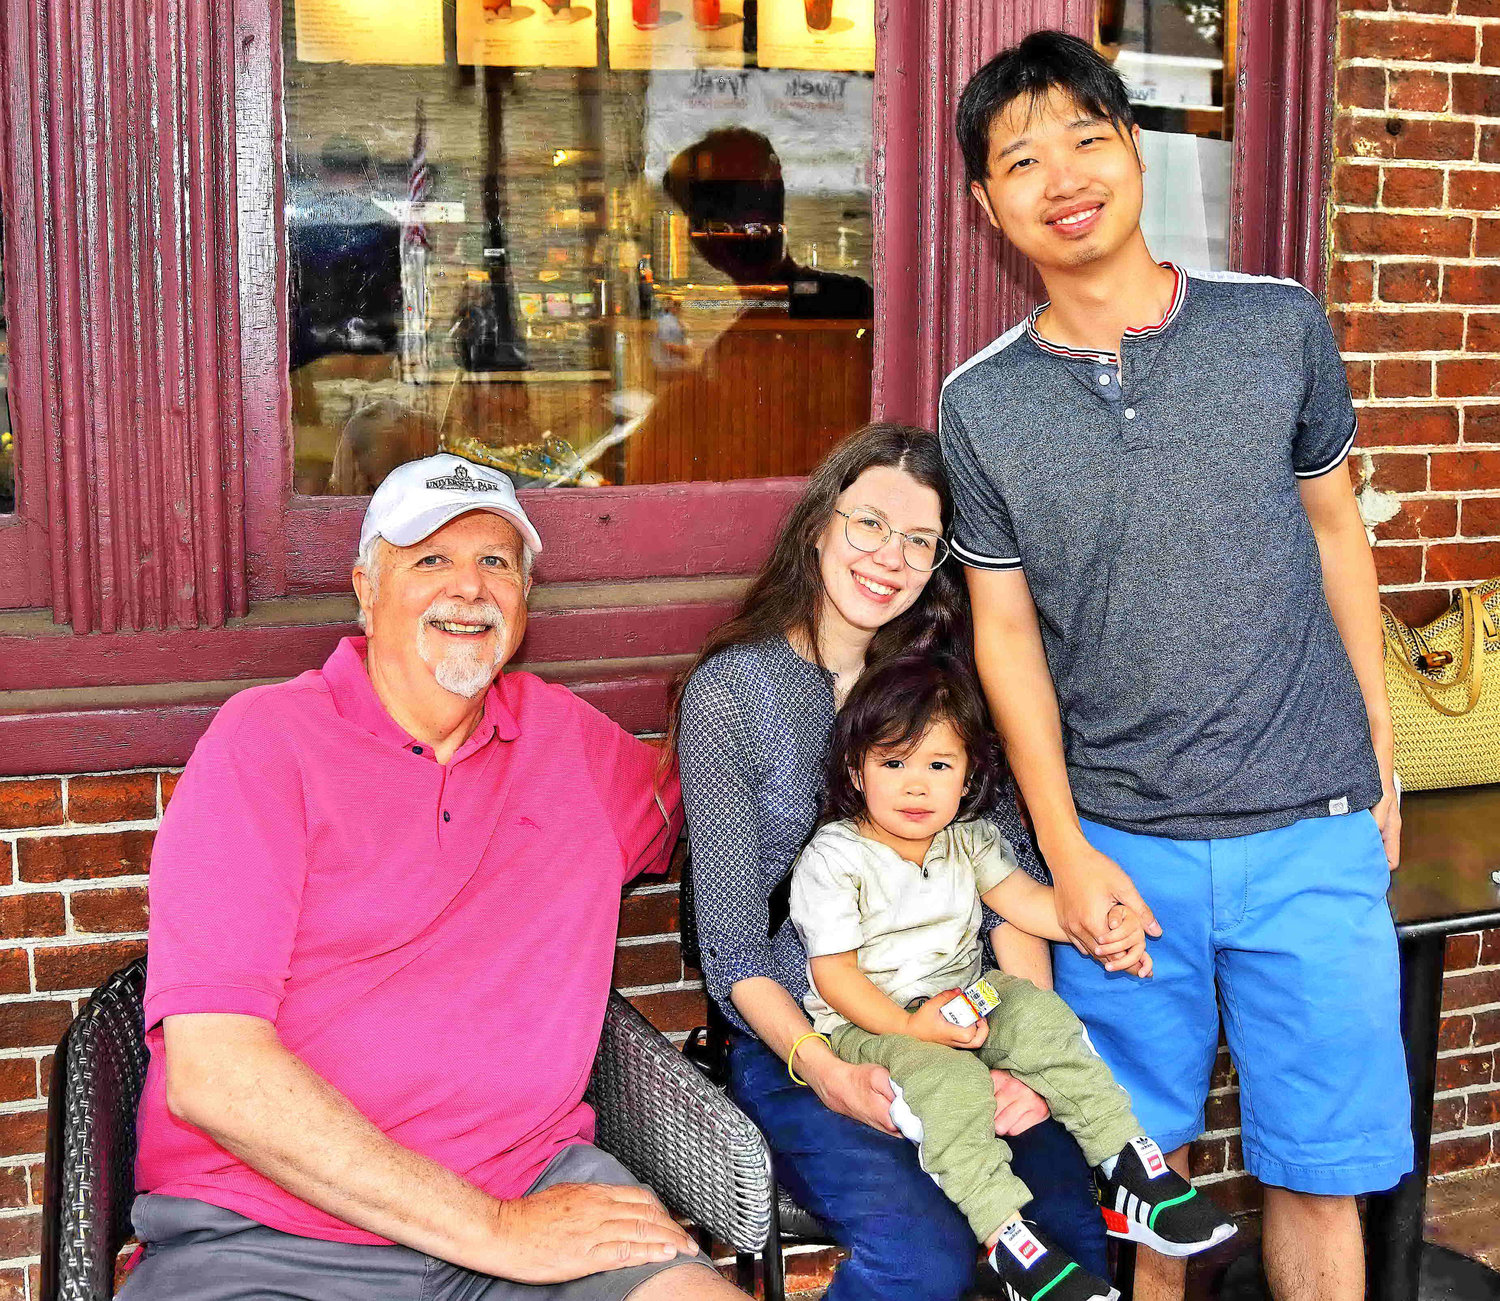 The Li family found an ideal viewing spot at Starbucks.